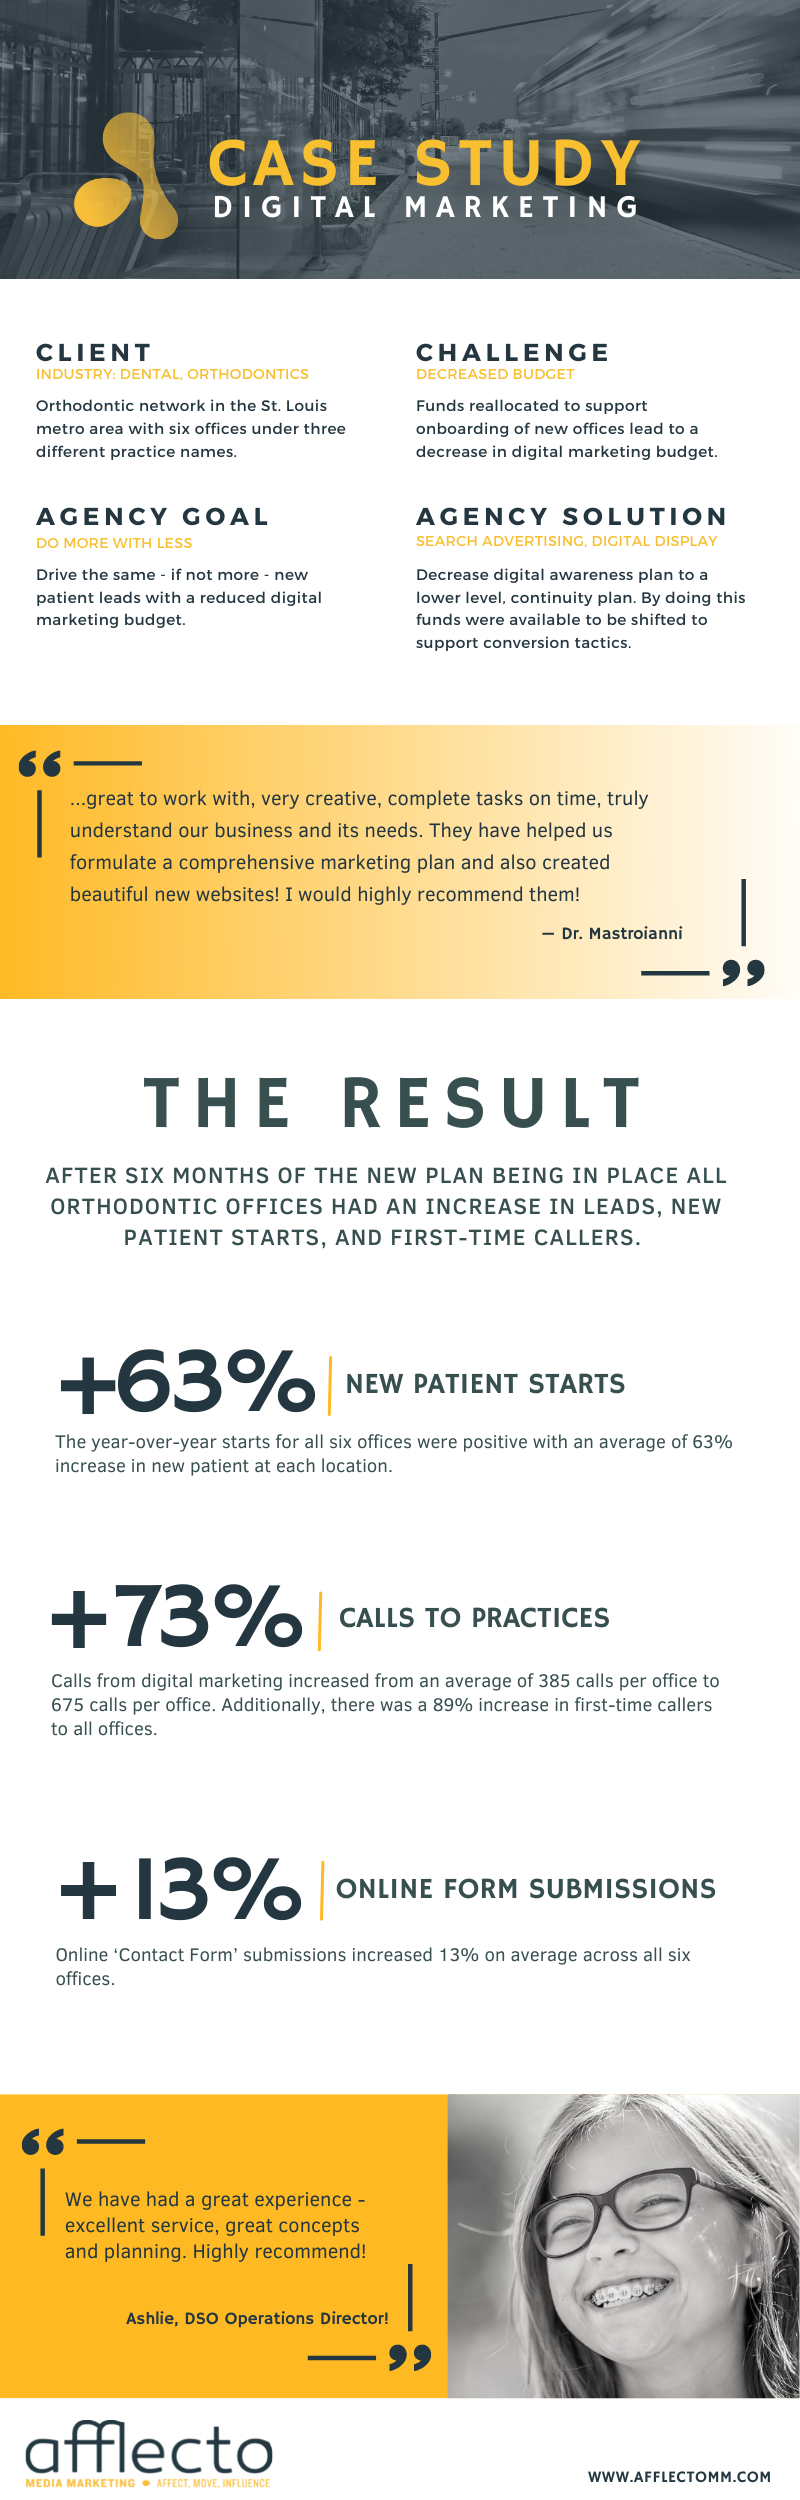 Afflecto increased leads, drove more new patient starts, and generated more first-time callers for this orthodontic practice.